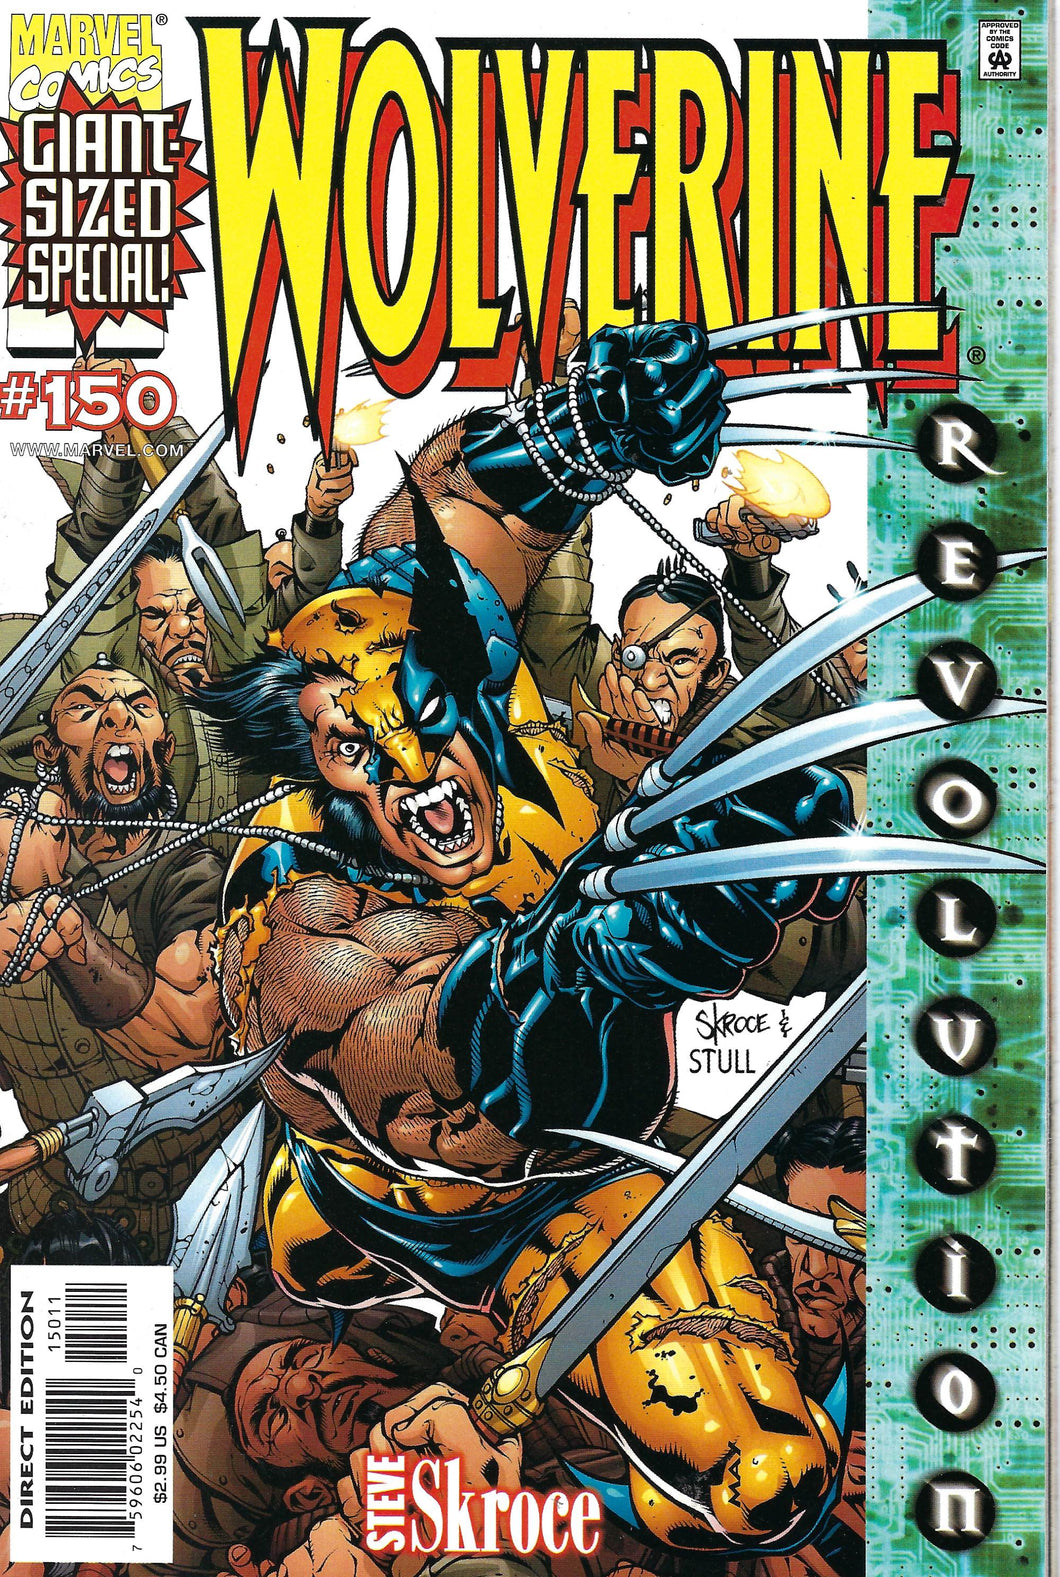 Wolverine #150 (Giant size special)